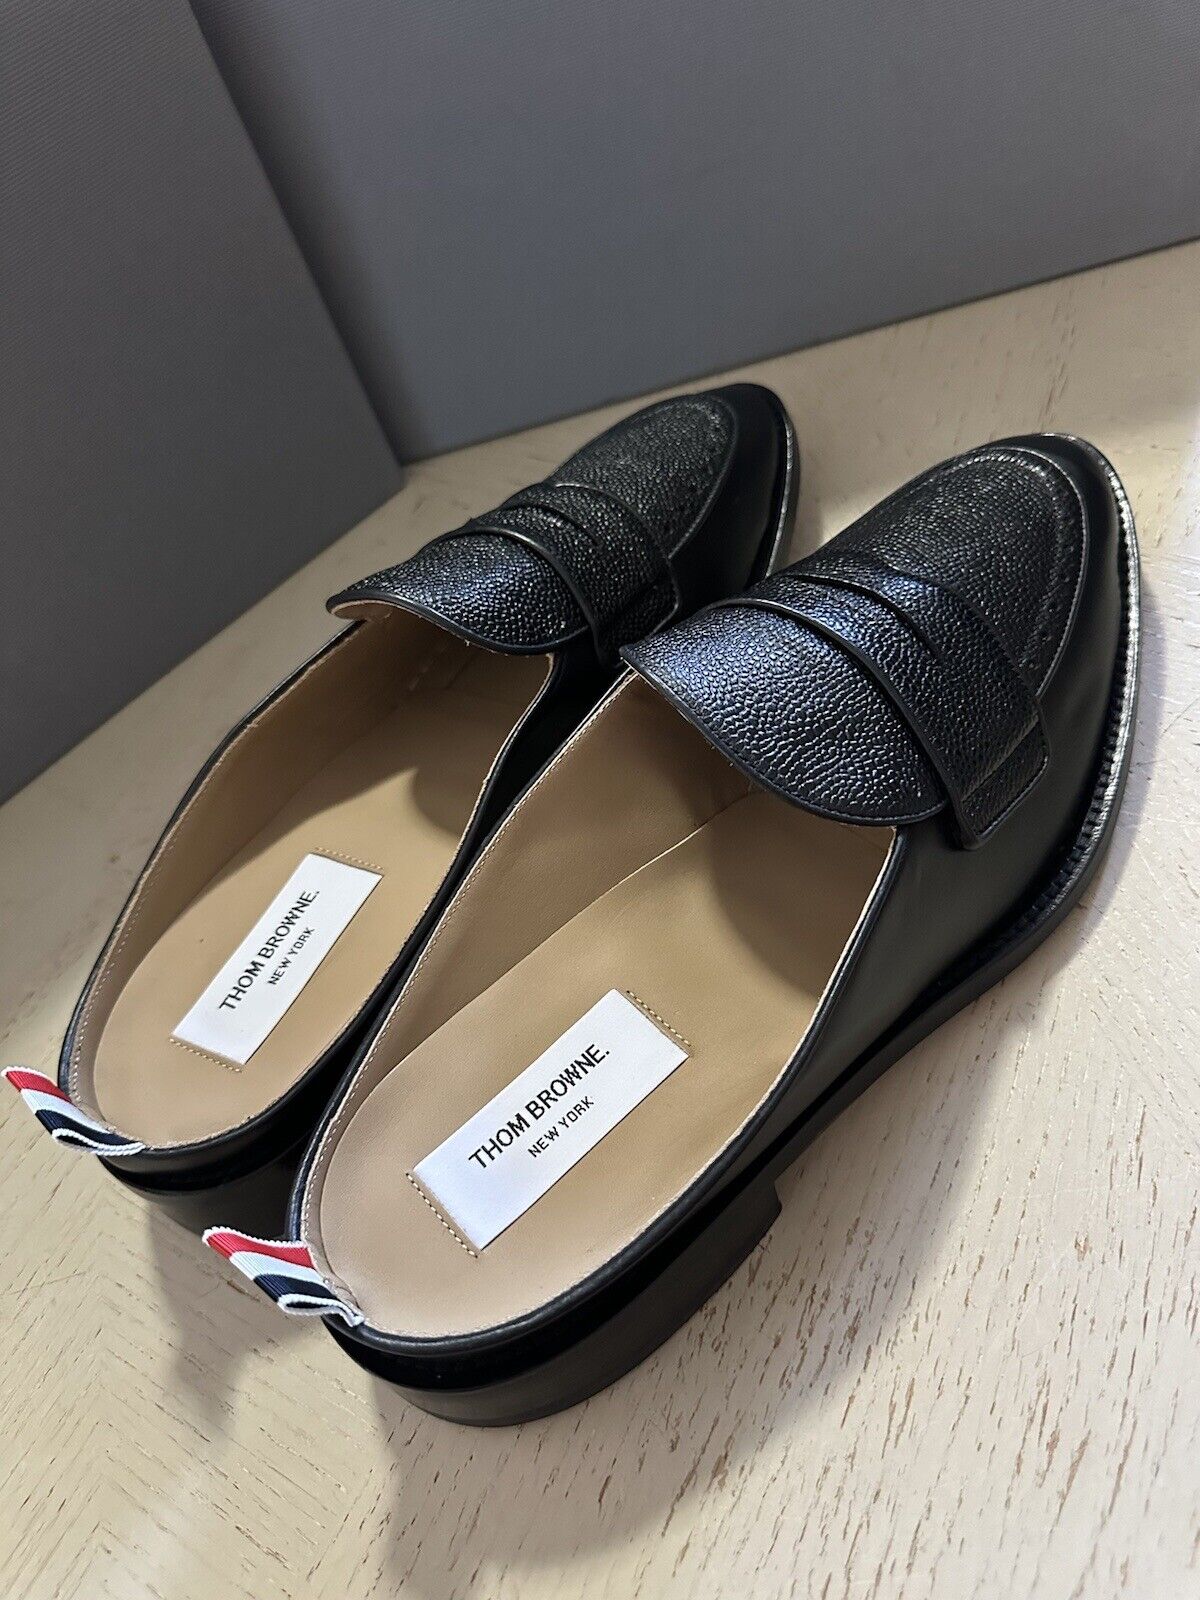 NIB Thom Browne Men Leather Penny Loafers Sandal Shoes Black 10 US / 43 EU Italy